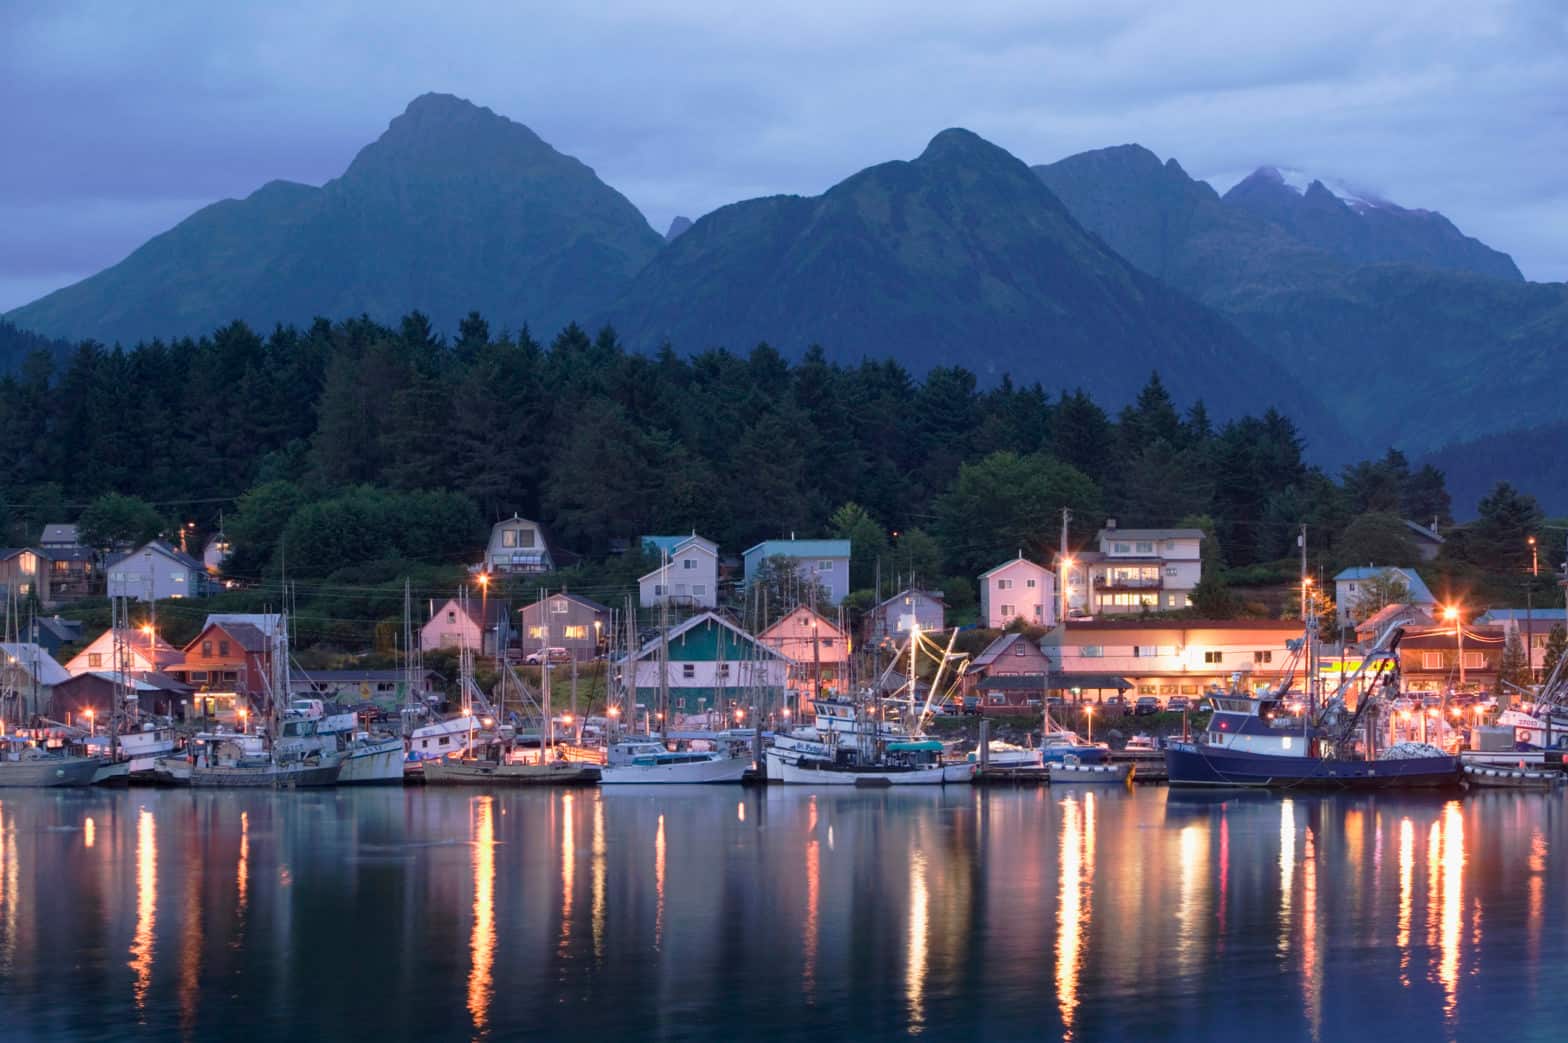 A harbor in Alaska in the evening time